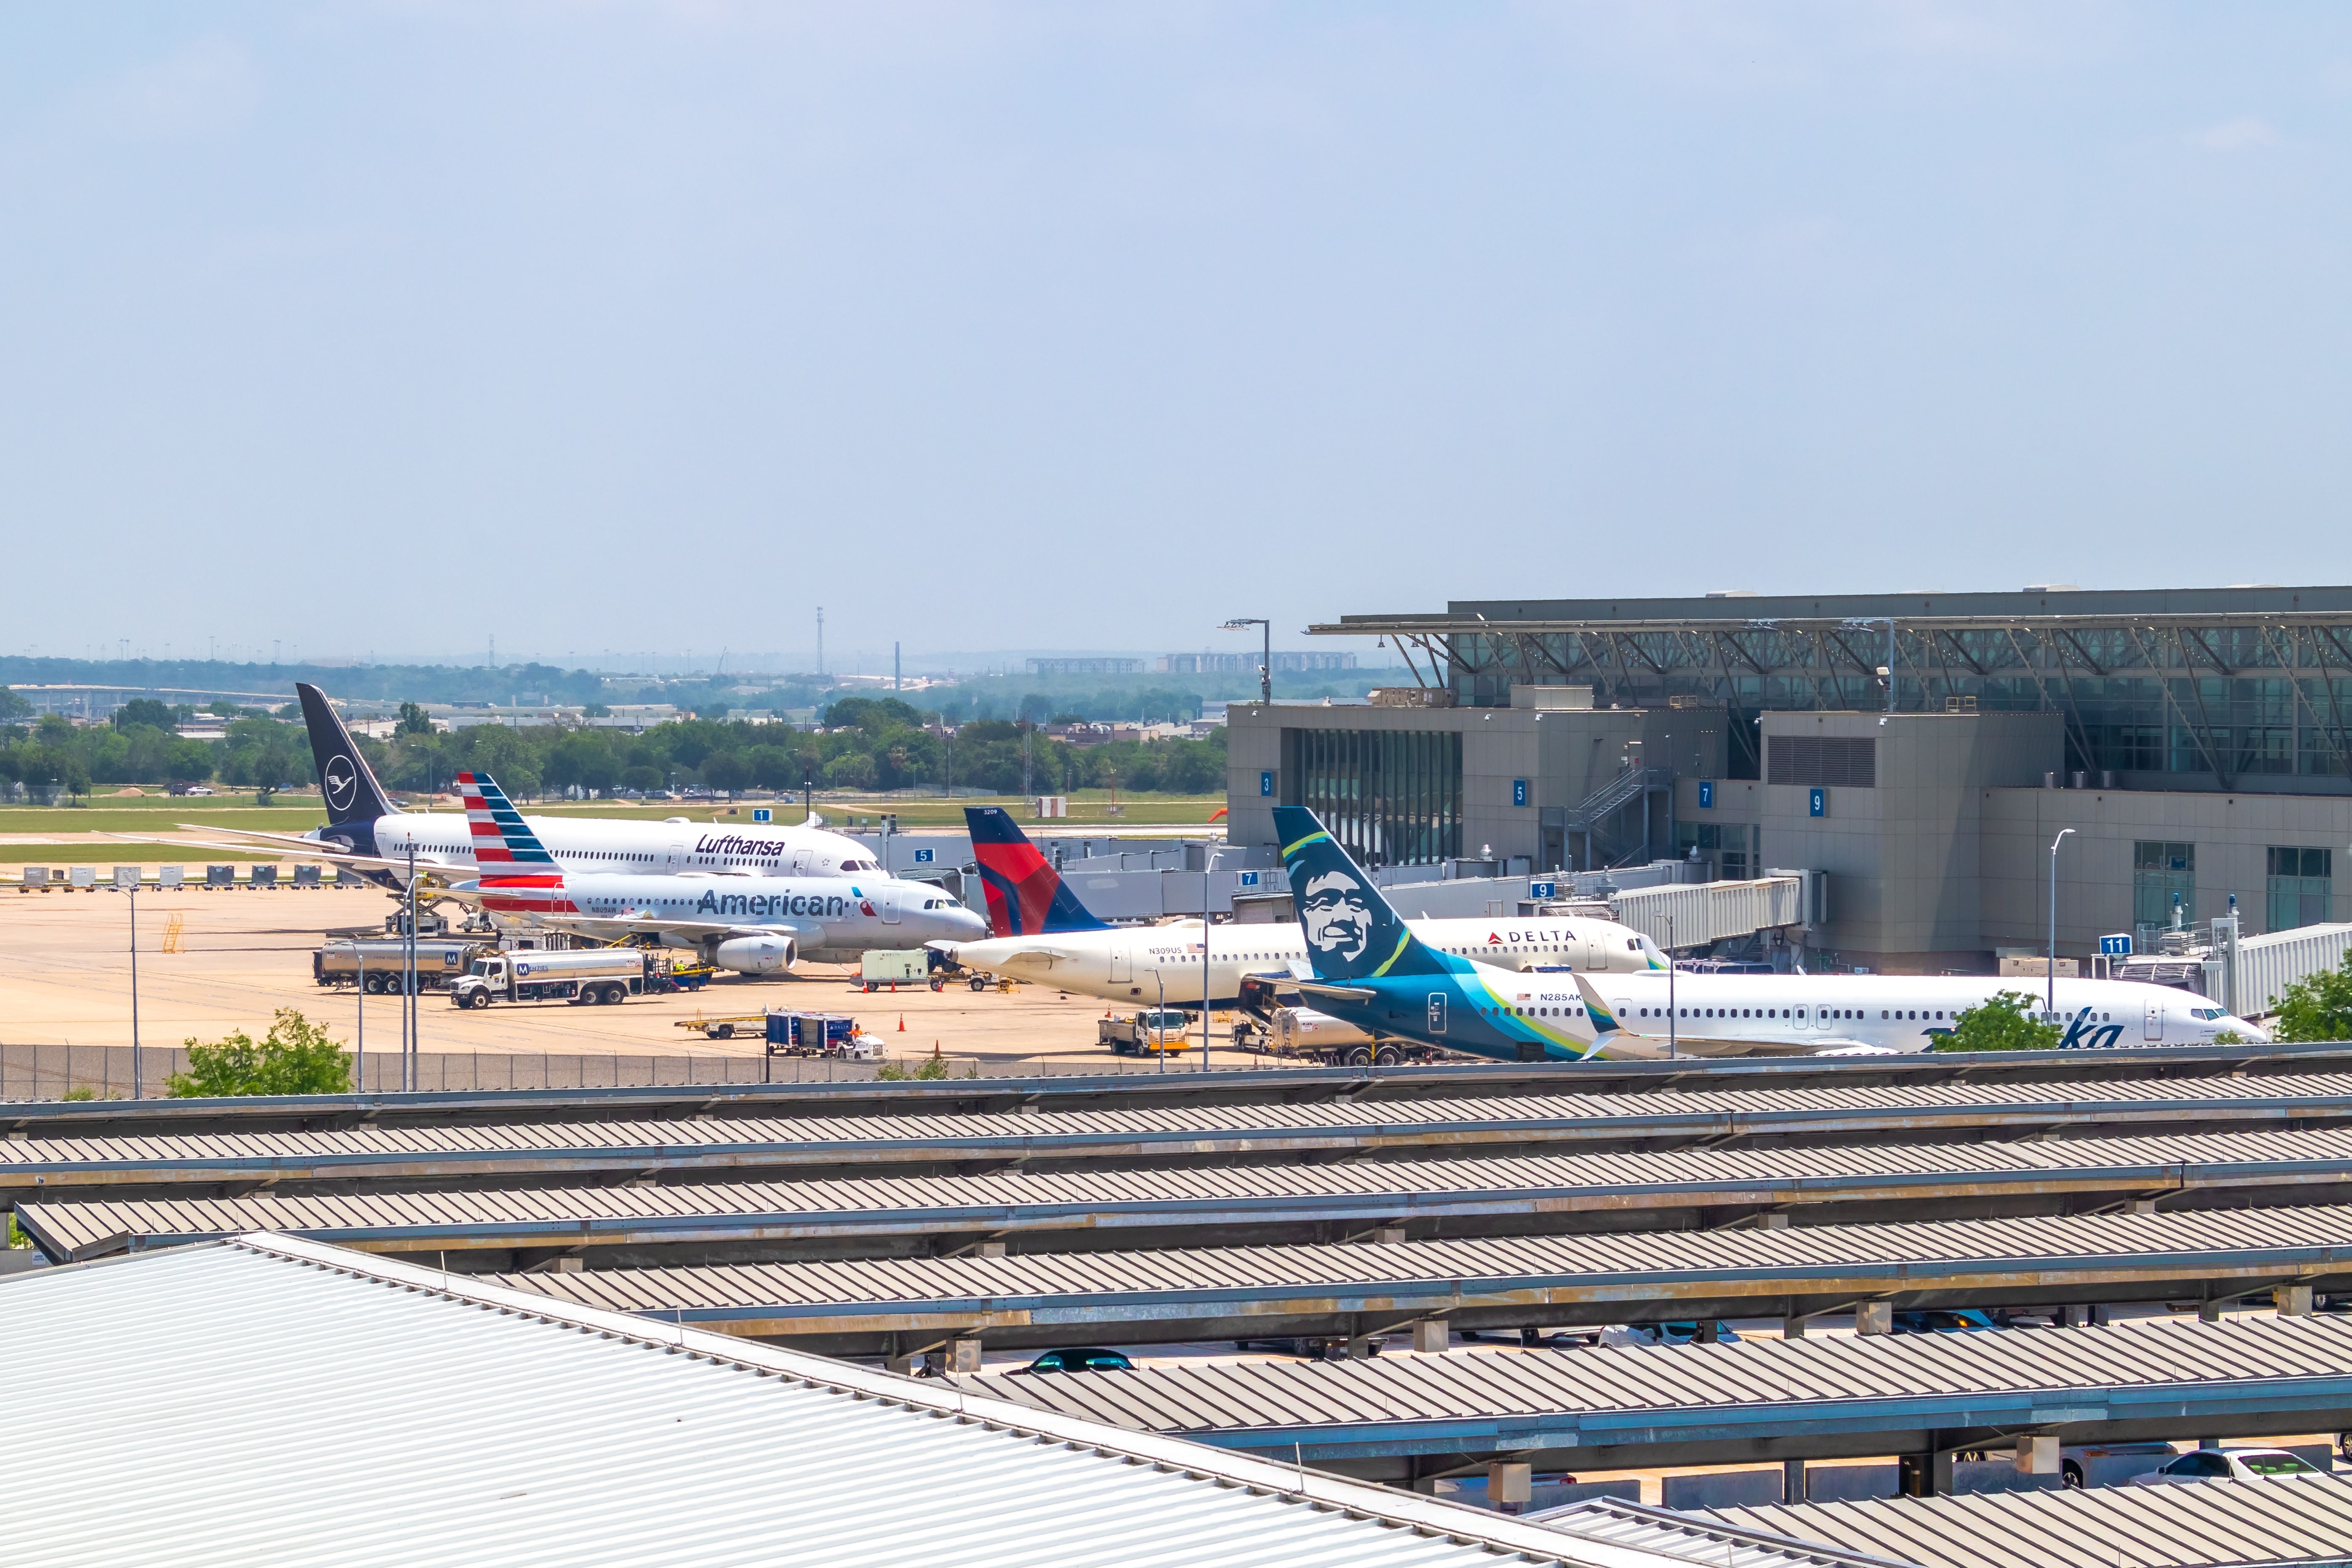 Several commercial aircraft at their gates at Austin-Bergstrom International Airport.